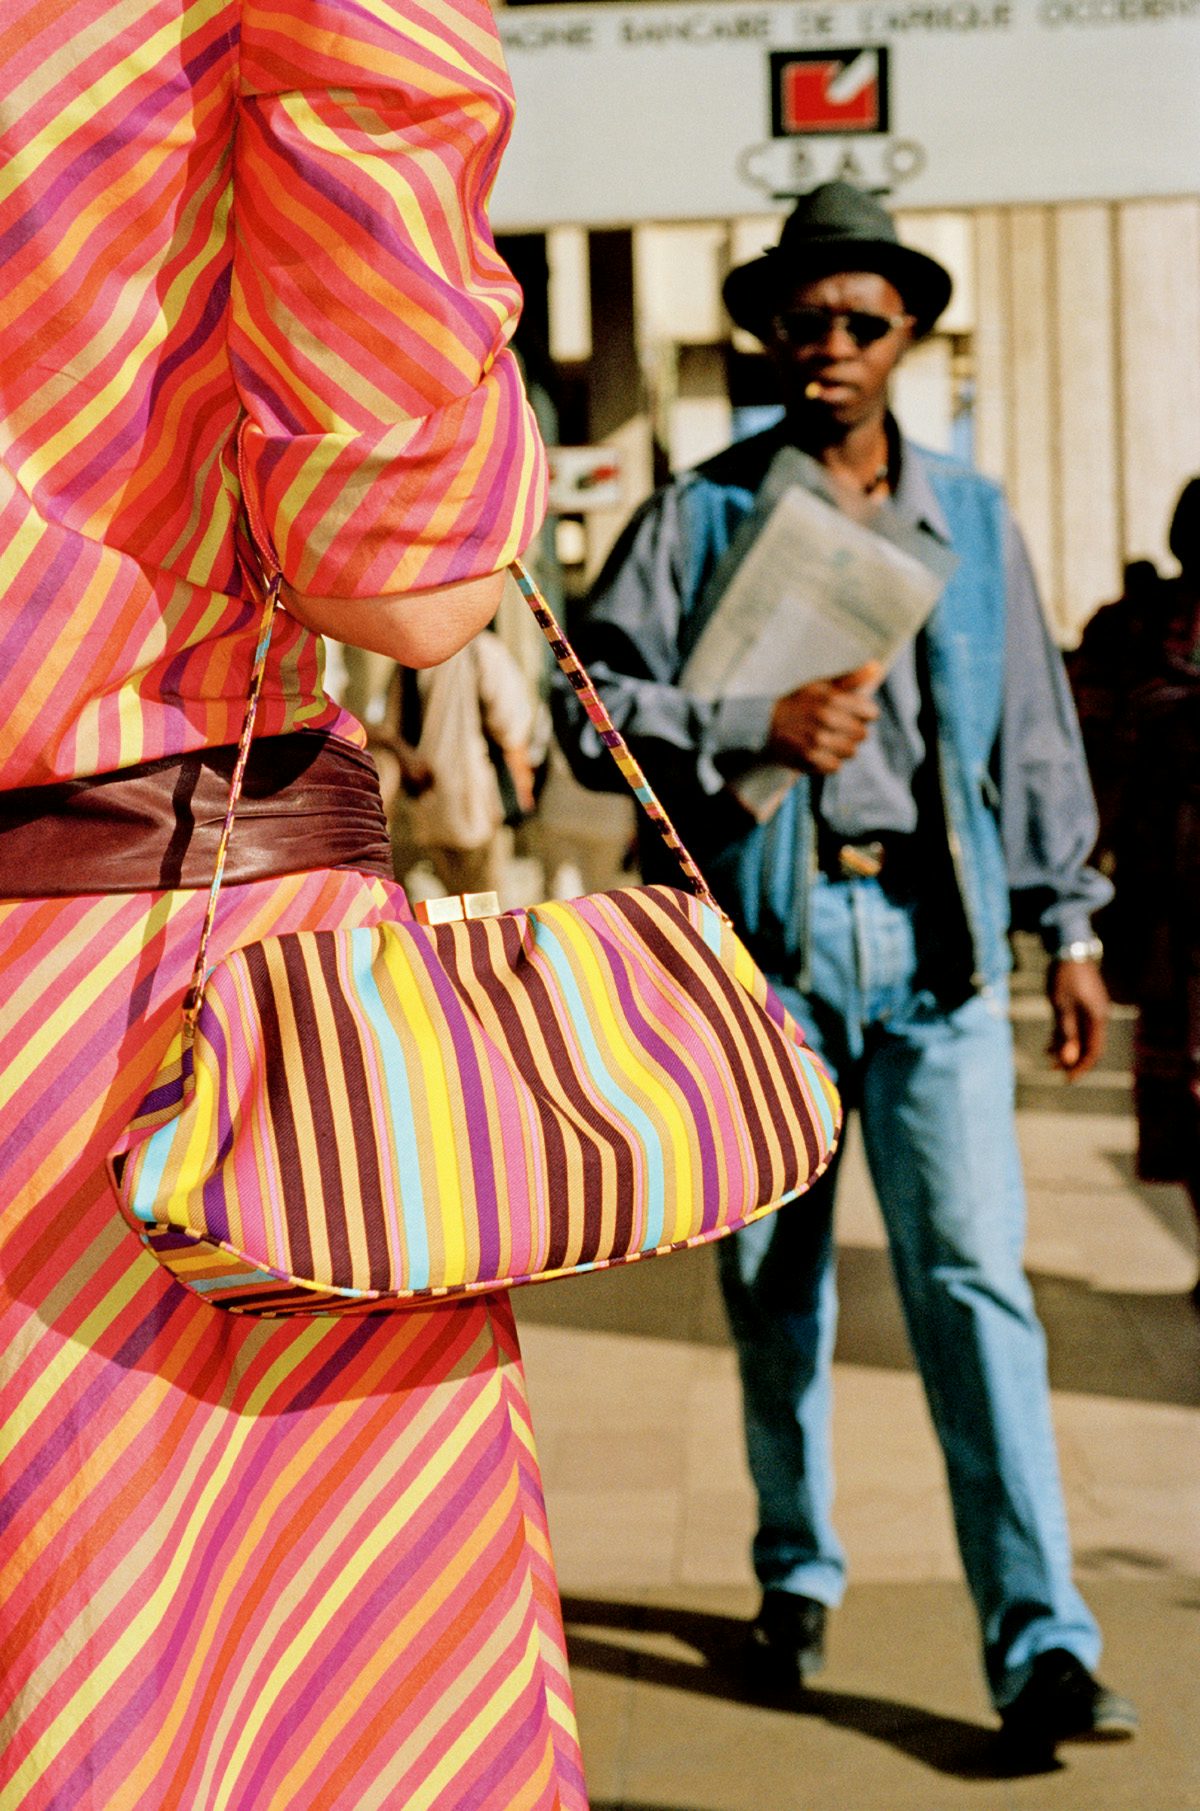 A close up of a person wearing a pink striped dress and bag in the foreground, with a person dressed entirely in denim and a wide-rimmed hat carrying a newspaper in the background